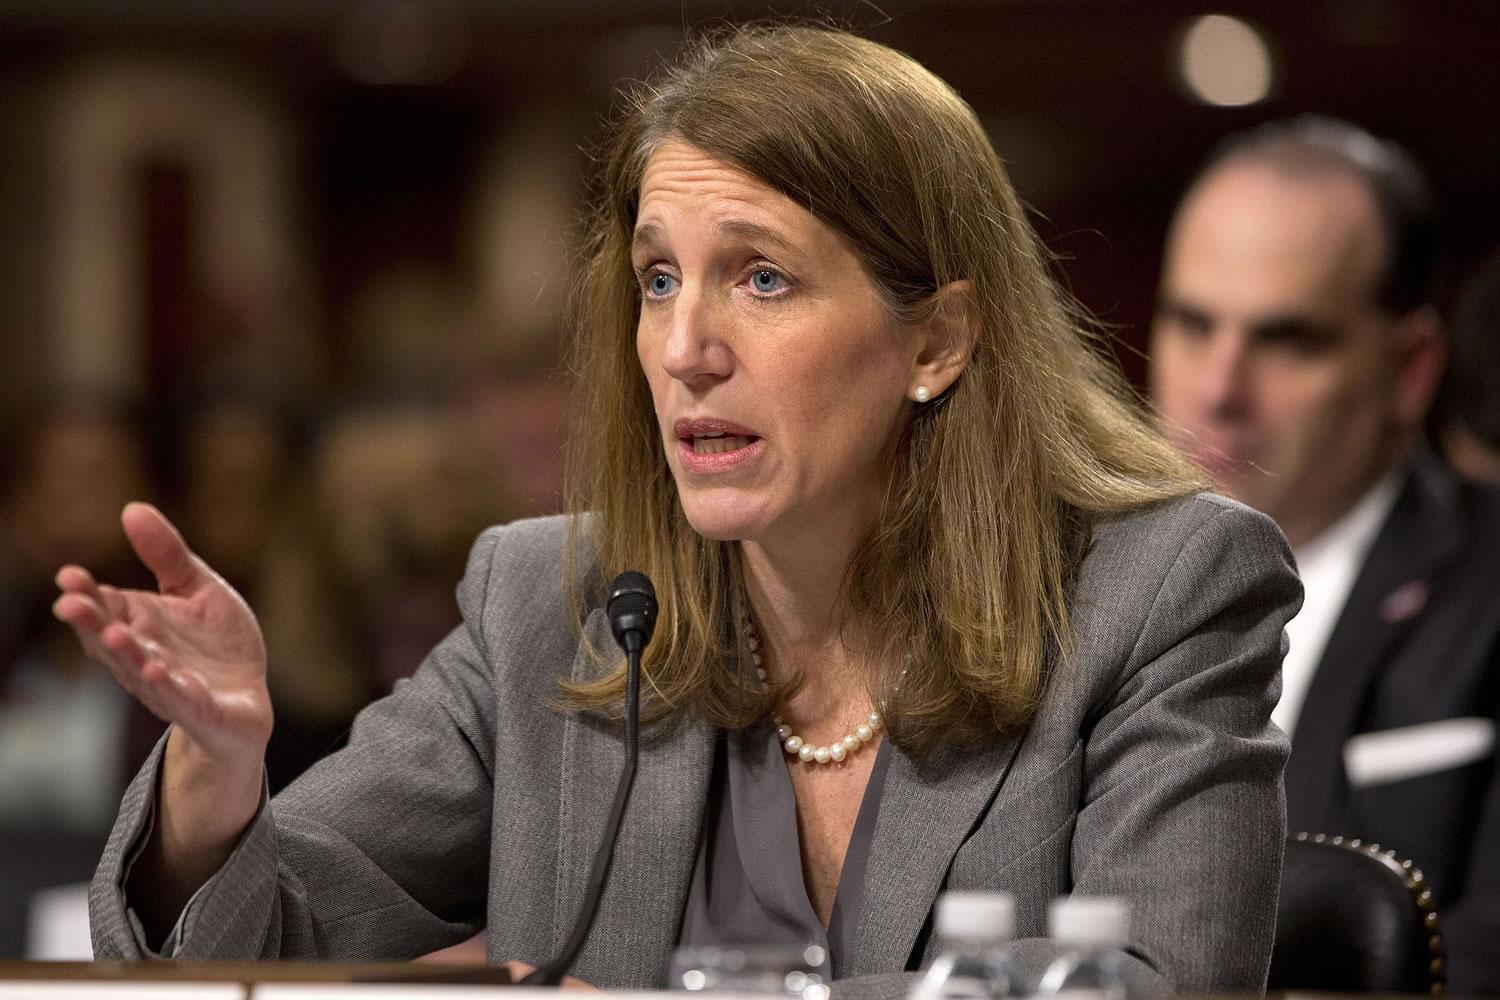 Health and Human Services Secretary Sylvia Burwell testifies on Capitol Hill in Washington.